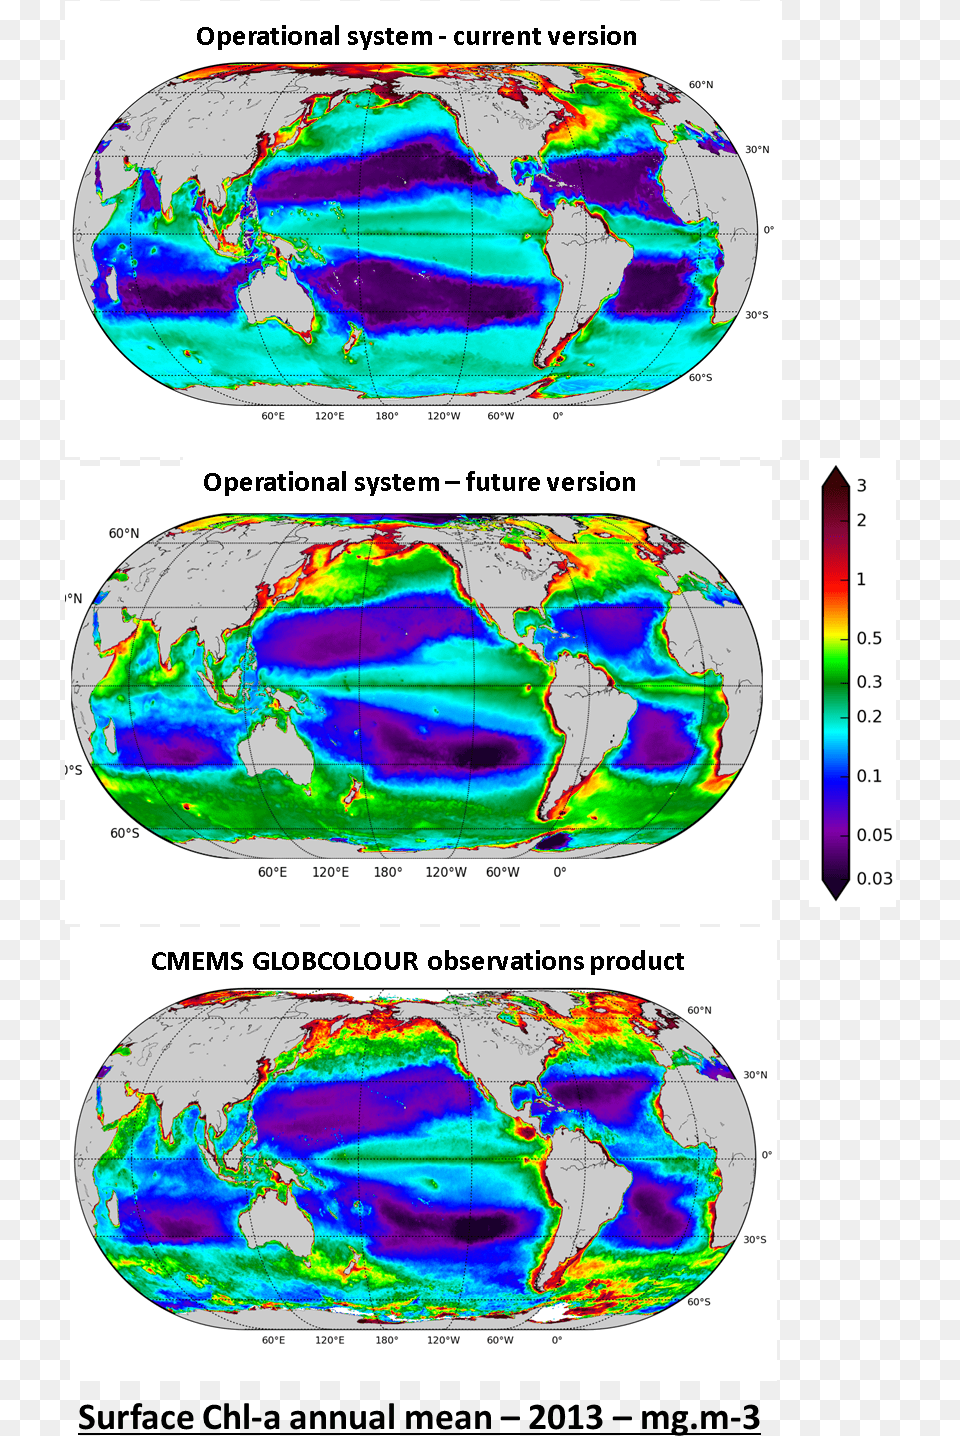 Ocean Colour Opperational System Now And In The Future Forecast Model Satellite Ocean Colour, Accessories, Gemstone, Jewelry, Chart Png Image